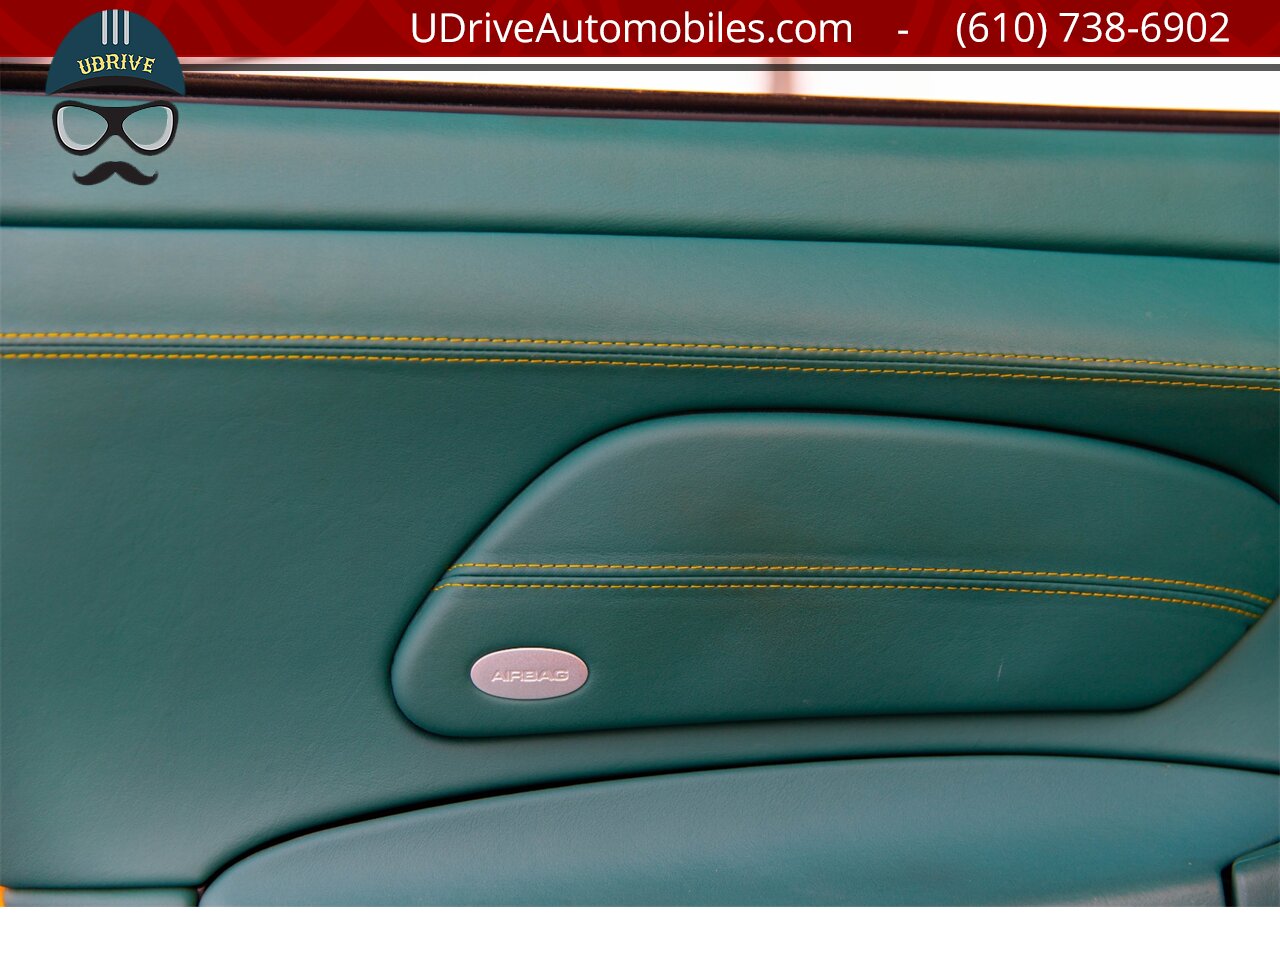 2003 Porsche 911 996 Turbo X50 6Sp Nephrite Green Lthr 9k Miles  Deviating Yellow Stitching Collector Grade BACK AGAIN - Photo 24 - West Chester, PA 19382